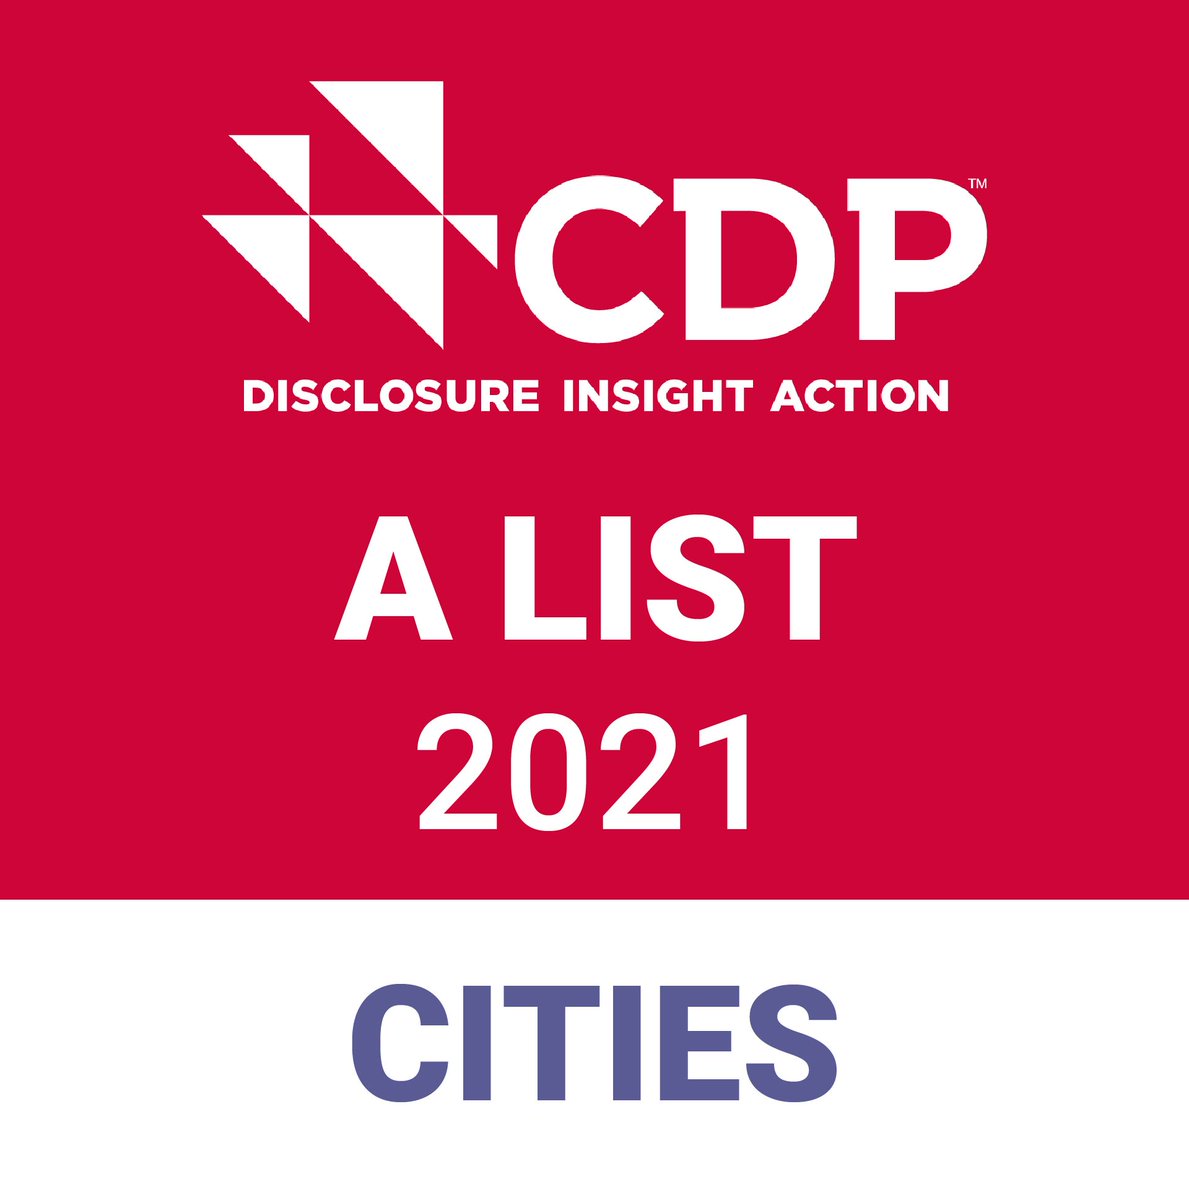 BREAKING: #Bristol has achieved an A rating - the highest score possible - for action on #ClimateChange in the CDP annual report. Bristol is in the top 10% globally & 1 of 11 cities in the UK to receive an A #BristolClimateAction cdp.net/en/cities/citi…